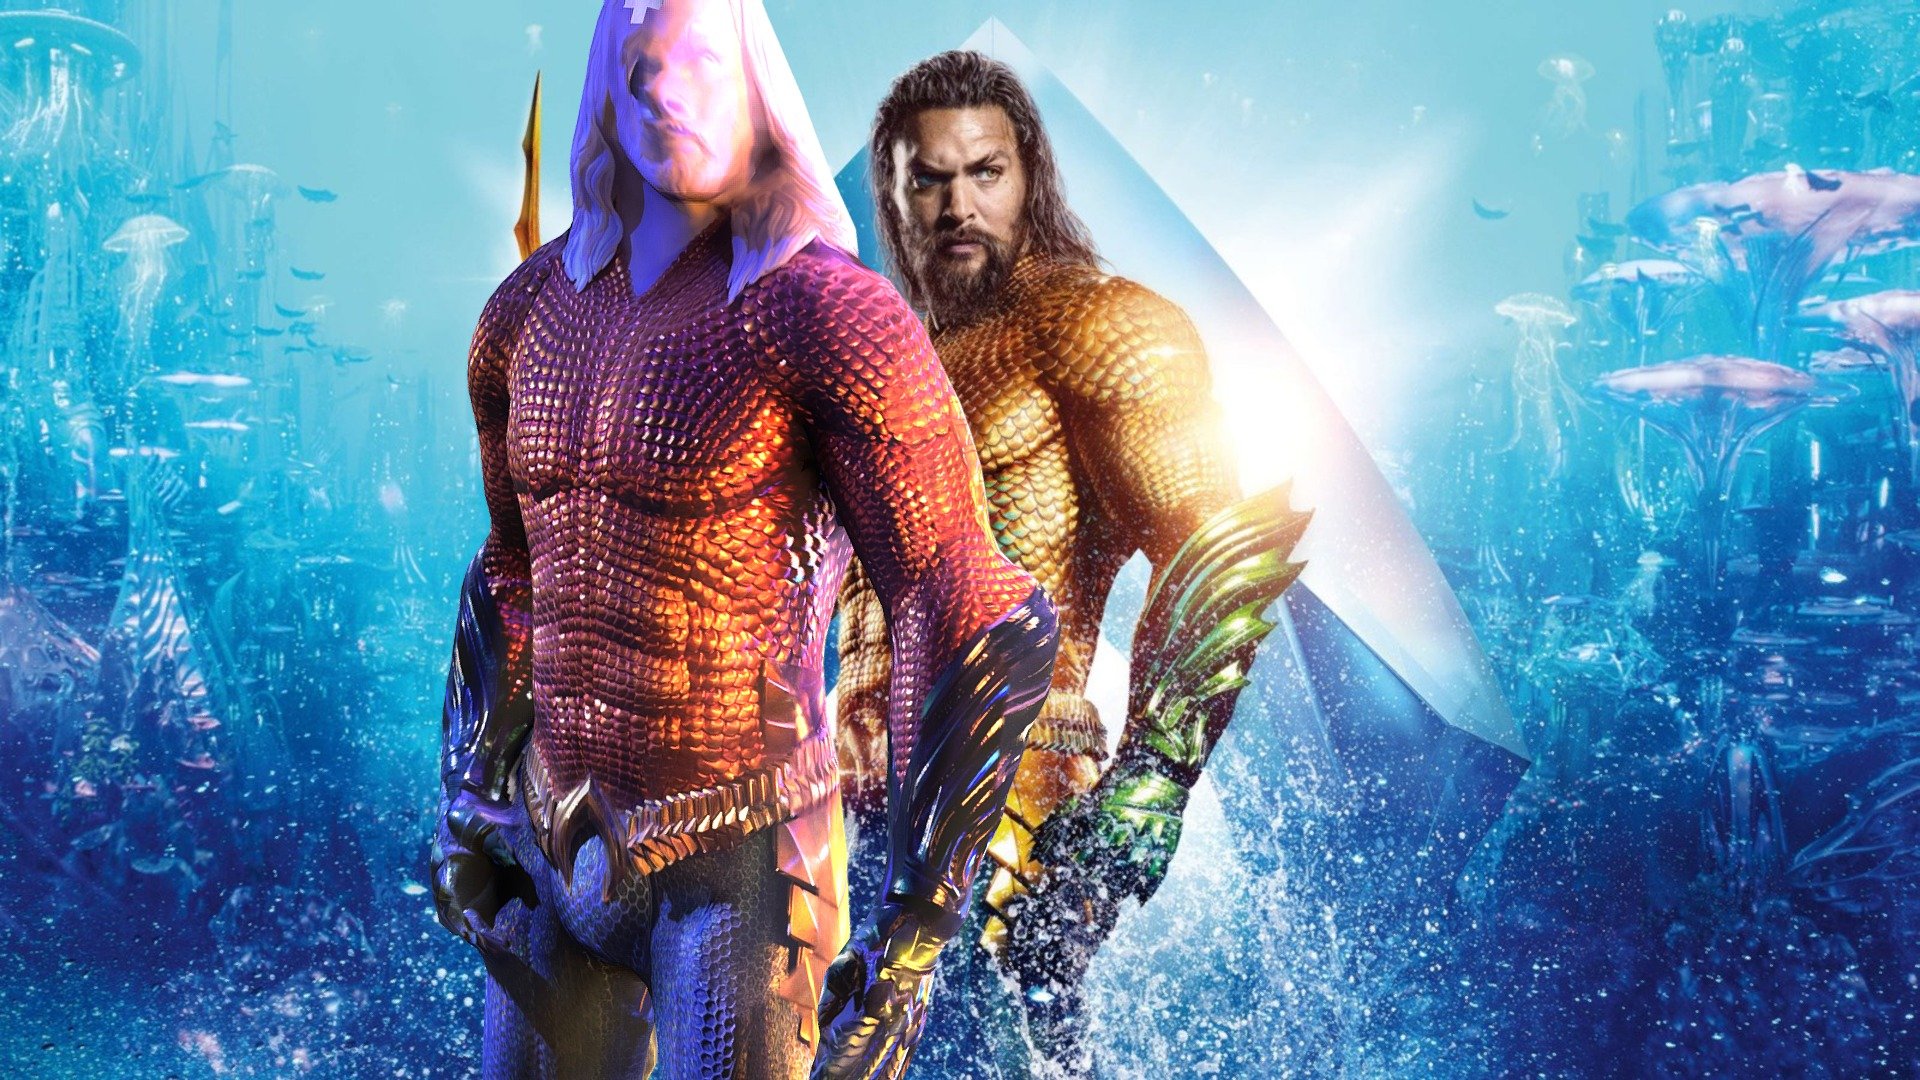 The Aquaman Screen Worn Suit 3D Scan with Scaniverse is a remarkable piece of digital art that brings to life the iconic costume worn by the superhero in the Aquaman movie. This incredible 3D scan captures the intricate details of the suit, from the shimmering scales to the intricate armor and trident emblem.

Created using cutting-edge technology and techniques, this 3D scan is the perfect addition to any collection of superhero memorabilia. With the Scaniverse app, viewers can explore the suit in stunning detail, zooming in to examine every detail up close. The suit is presented in a high-quality digital format , allowing fans to appreciate every aspect of this iconic piece of movie history.

Warner Bros. granted us permission to scan over 30 iconic costumes from different franchises. We will share the costumes that they are not interested in using for our project as a reference 3d model